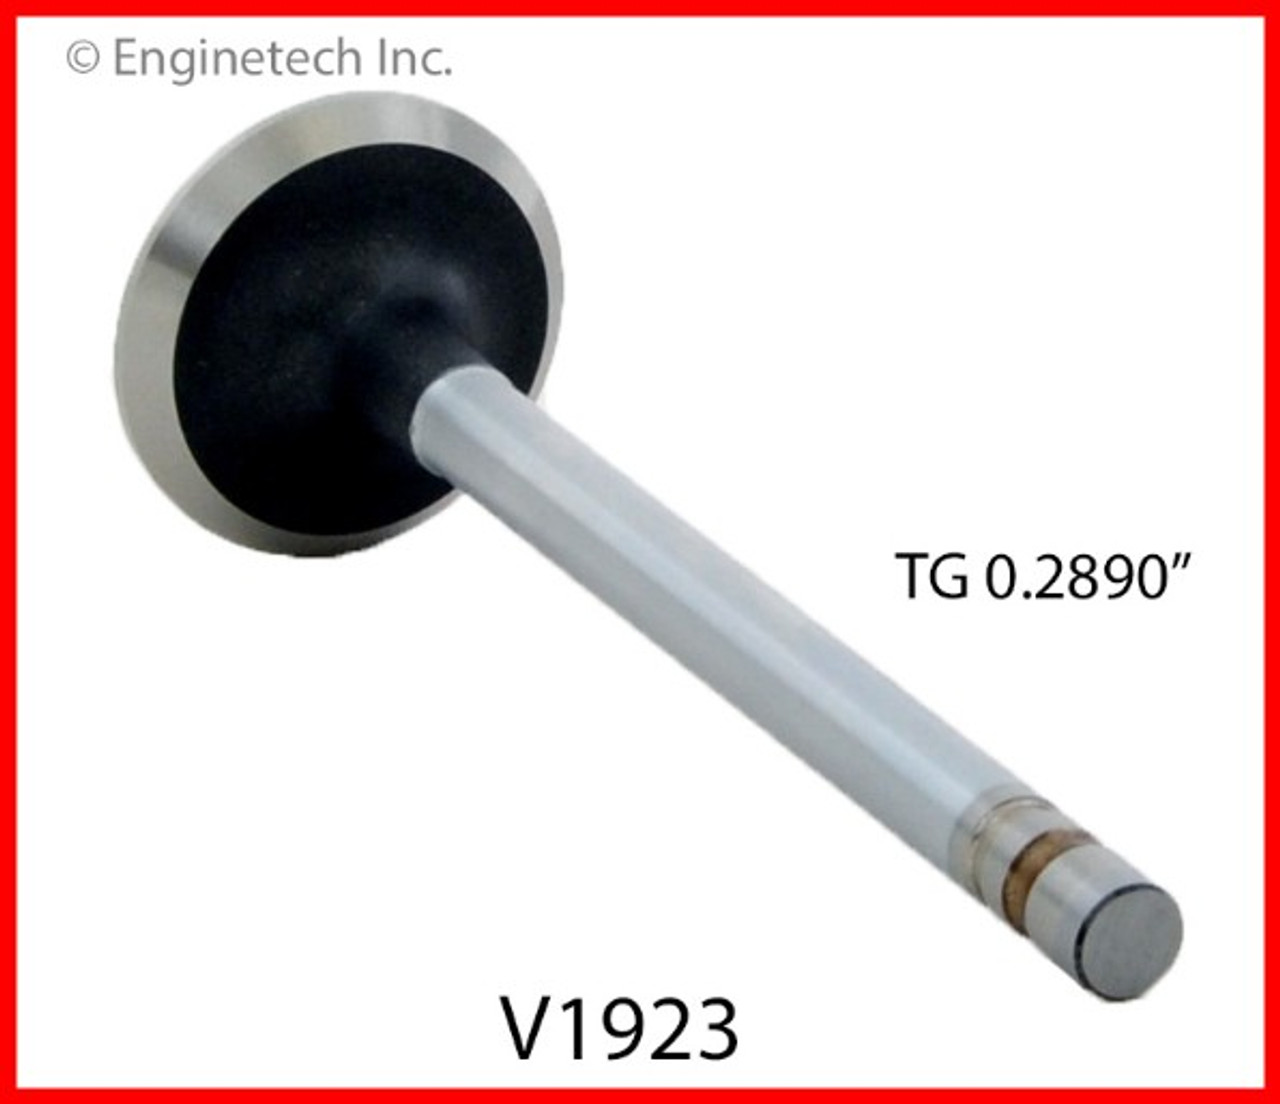 Exhaust Valve - 1992 Chevrolet Commercial Chassis 5.0L (V1923B.L4941)